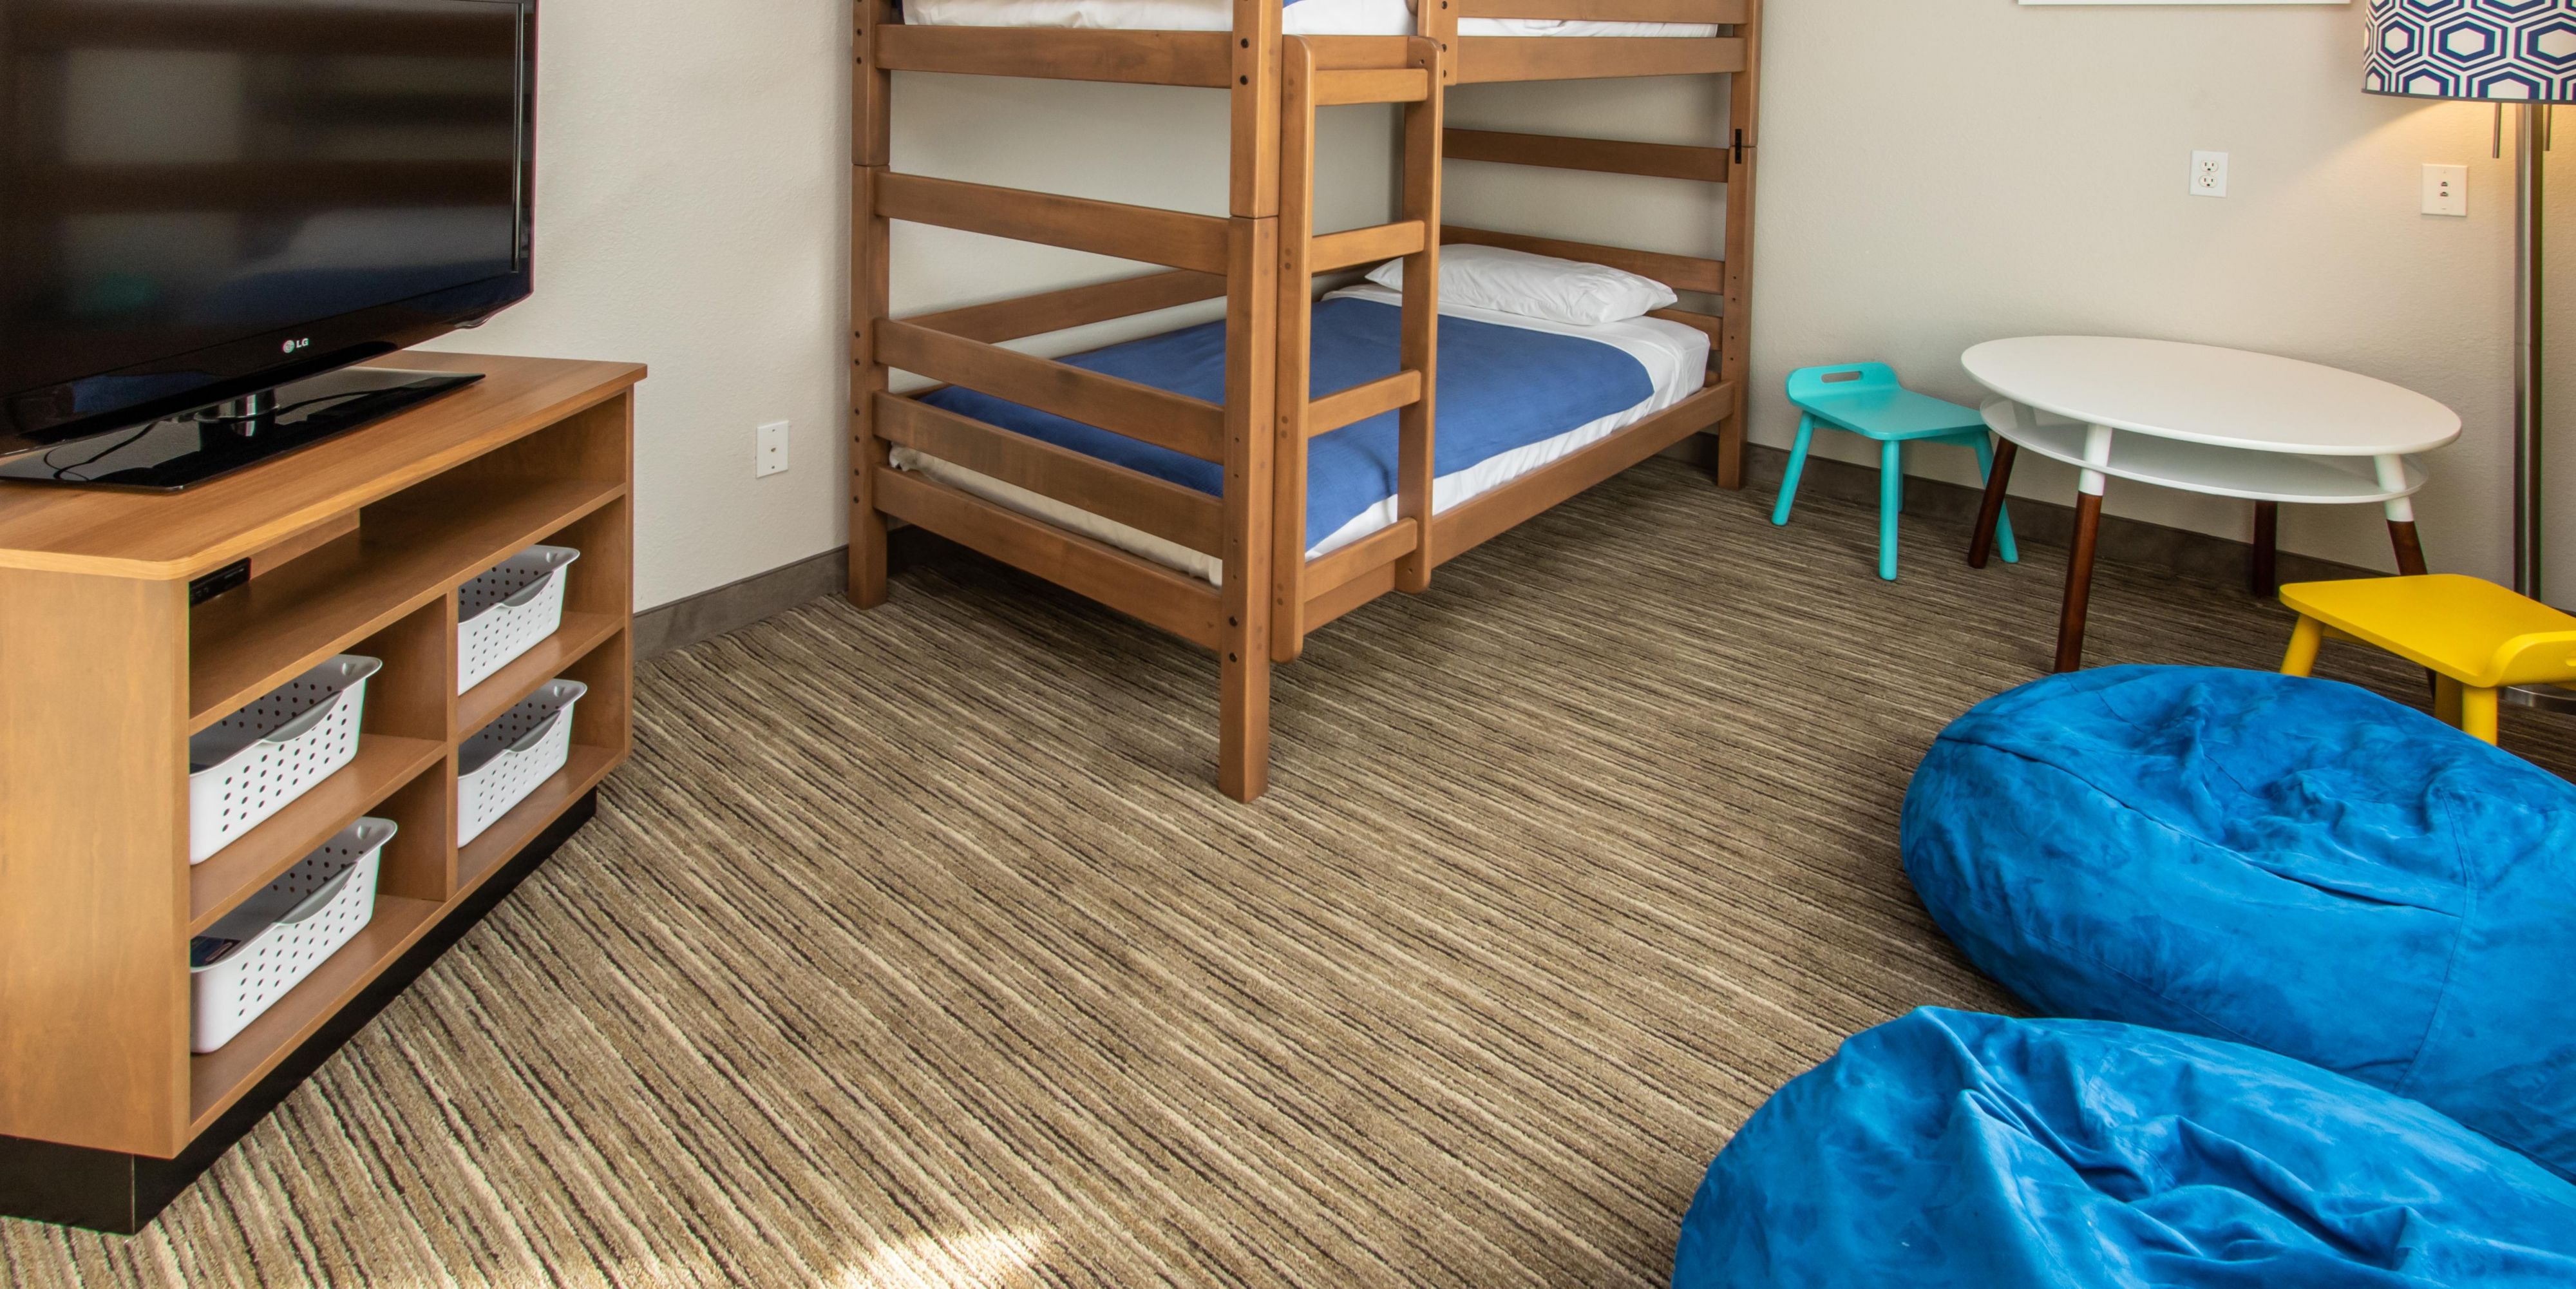 Family vacation? We have the perfect room for you. Call in and ask about our family suites.
Two different layouts - 1 king bed with a set of bunk beds and 2 queen beds with bunk beds.
2 TVs ins every room, refrigerator & microwave, full hot breakfast buffet every morning.
